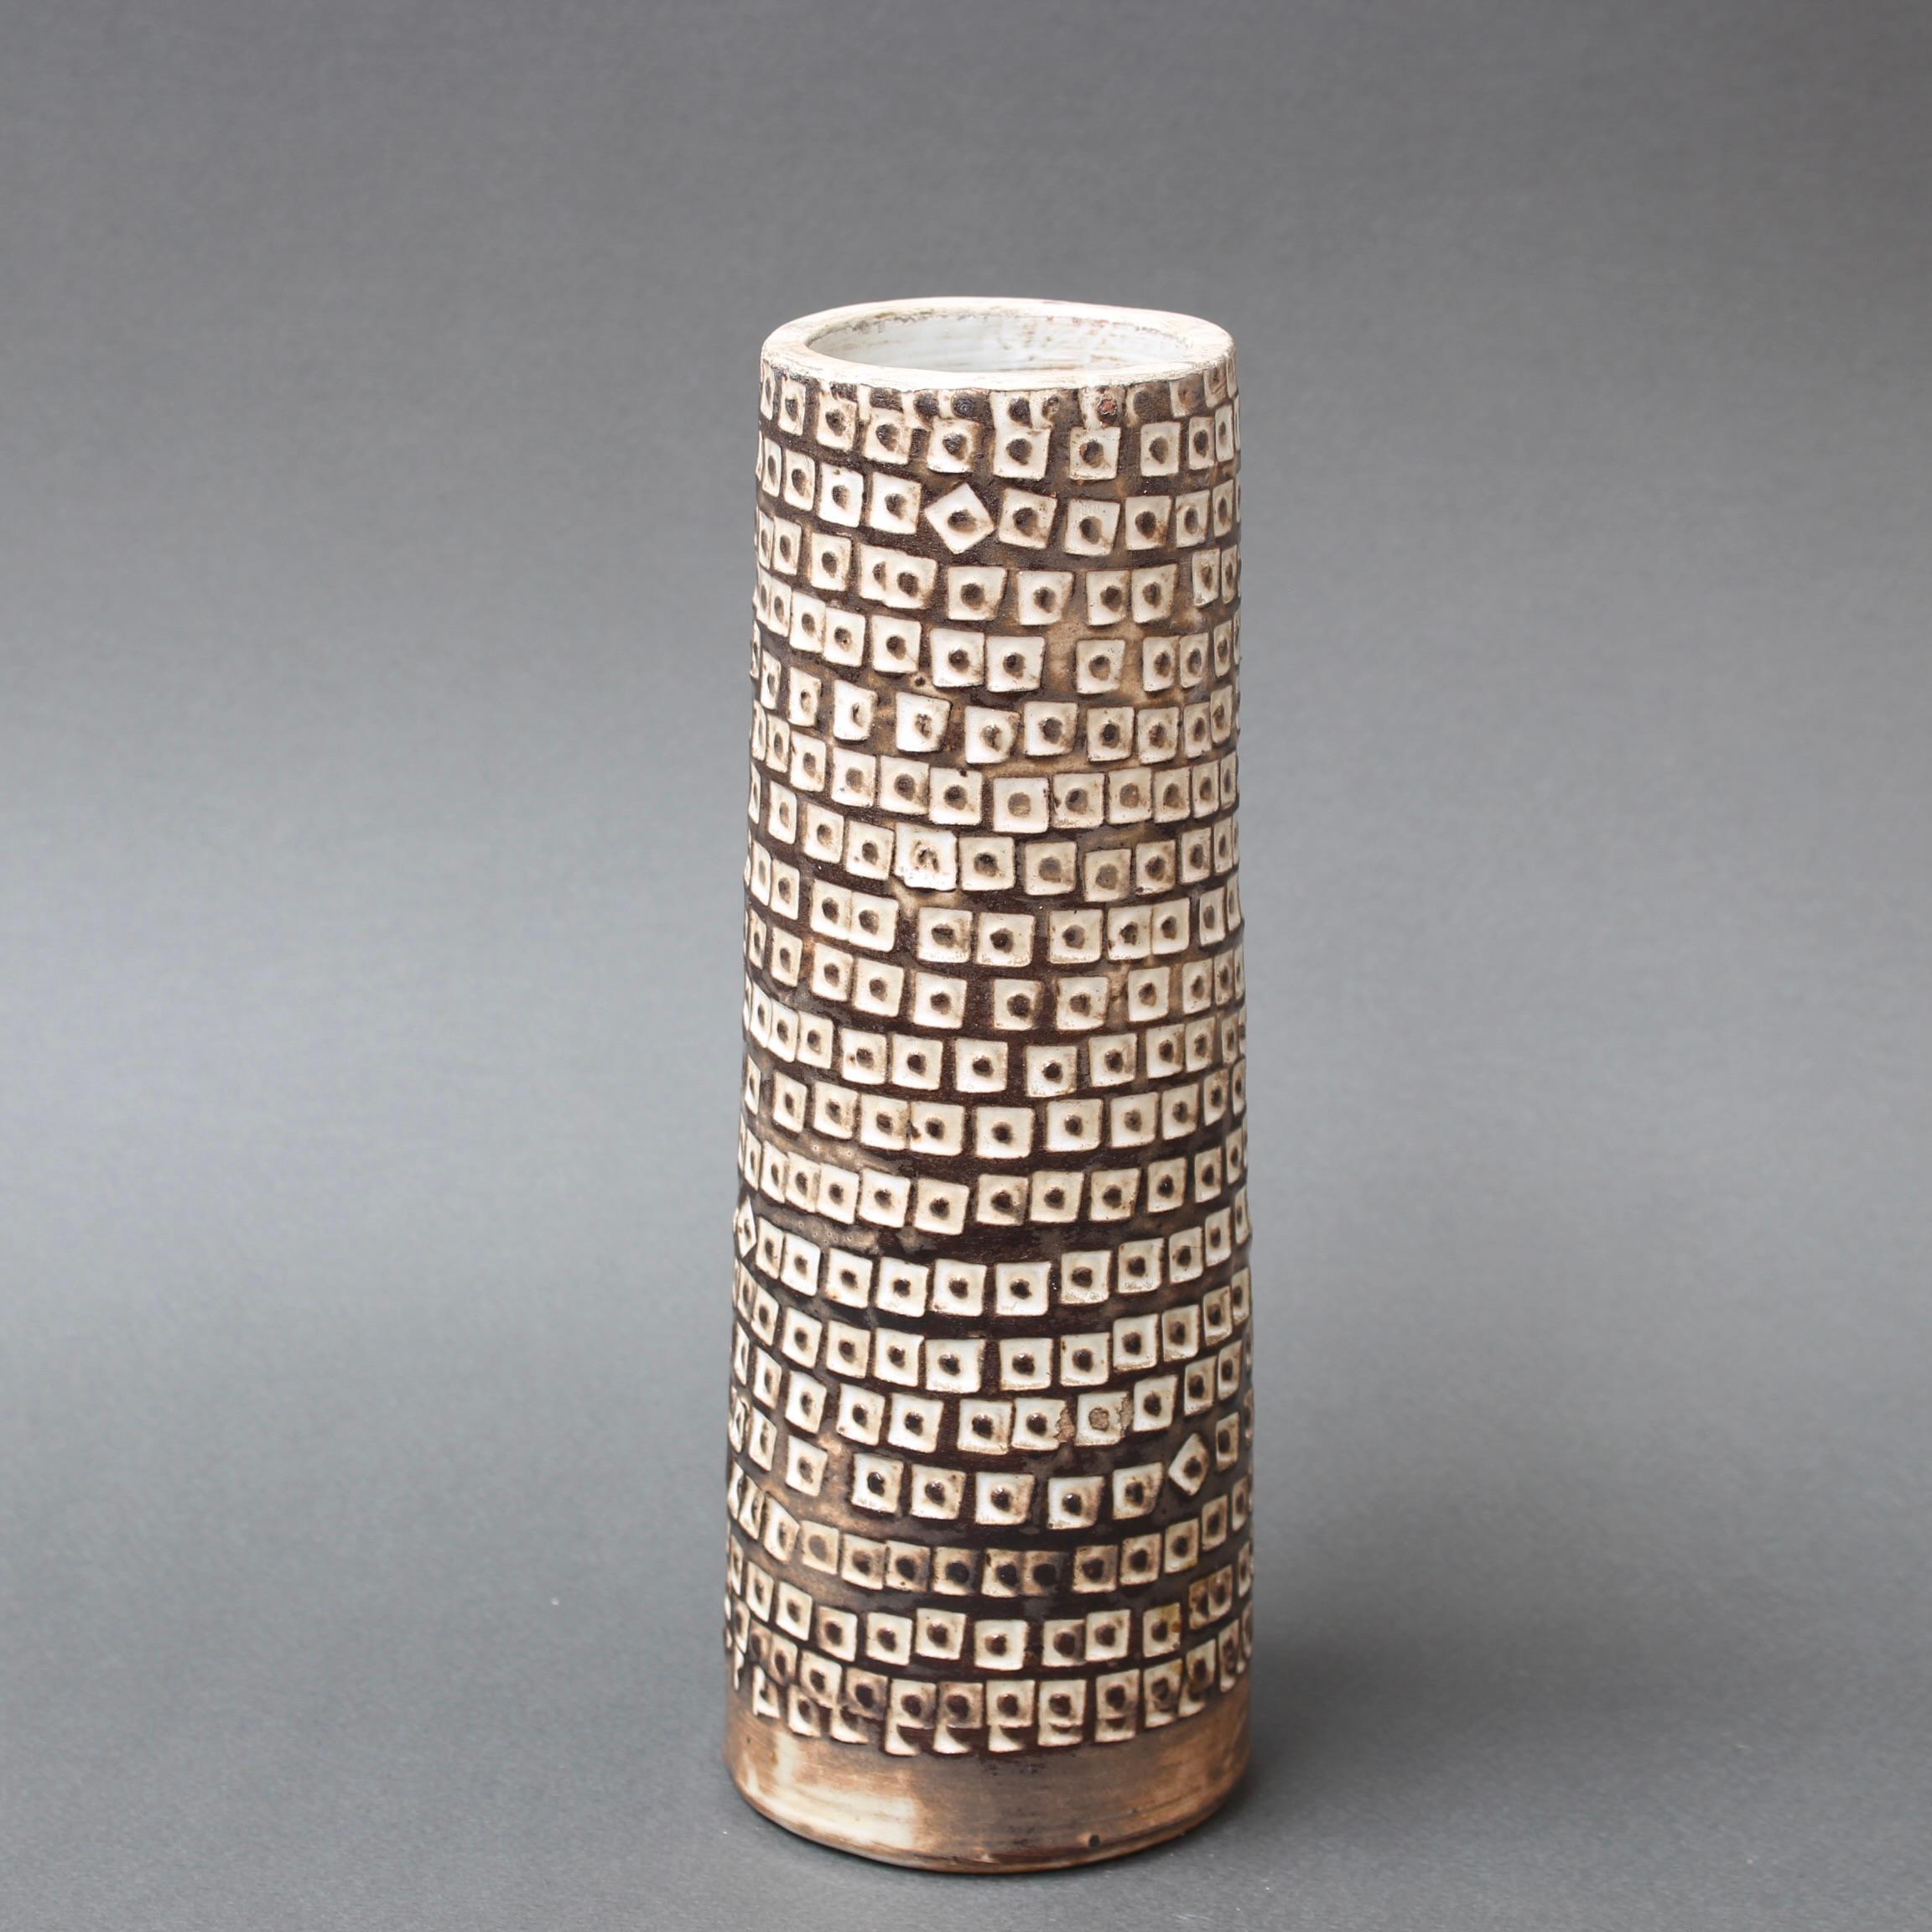 Decorative cylindrical ceramic flower vase (circa 1960s), by Jacques Pouchain. There is a tribal quality to the decoration of this mid-century vase. The geometric shapes in white, each with a brown spot, form a mesmerising pattern throughout. It is